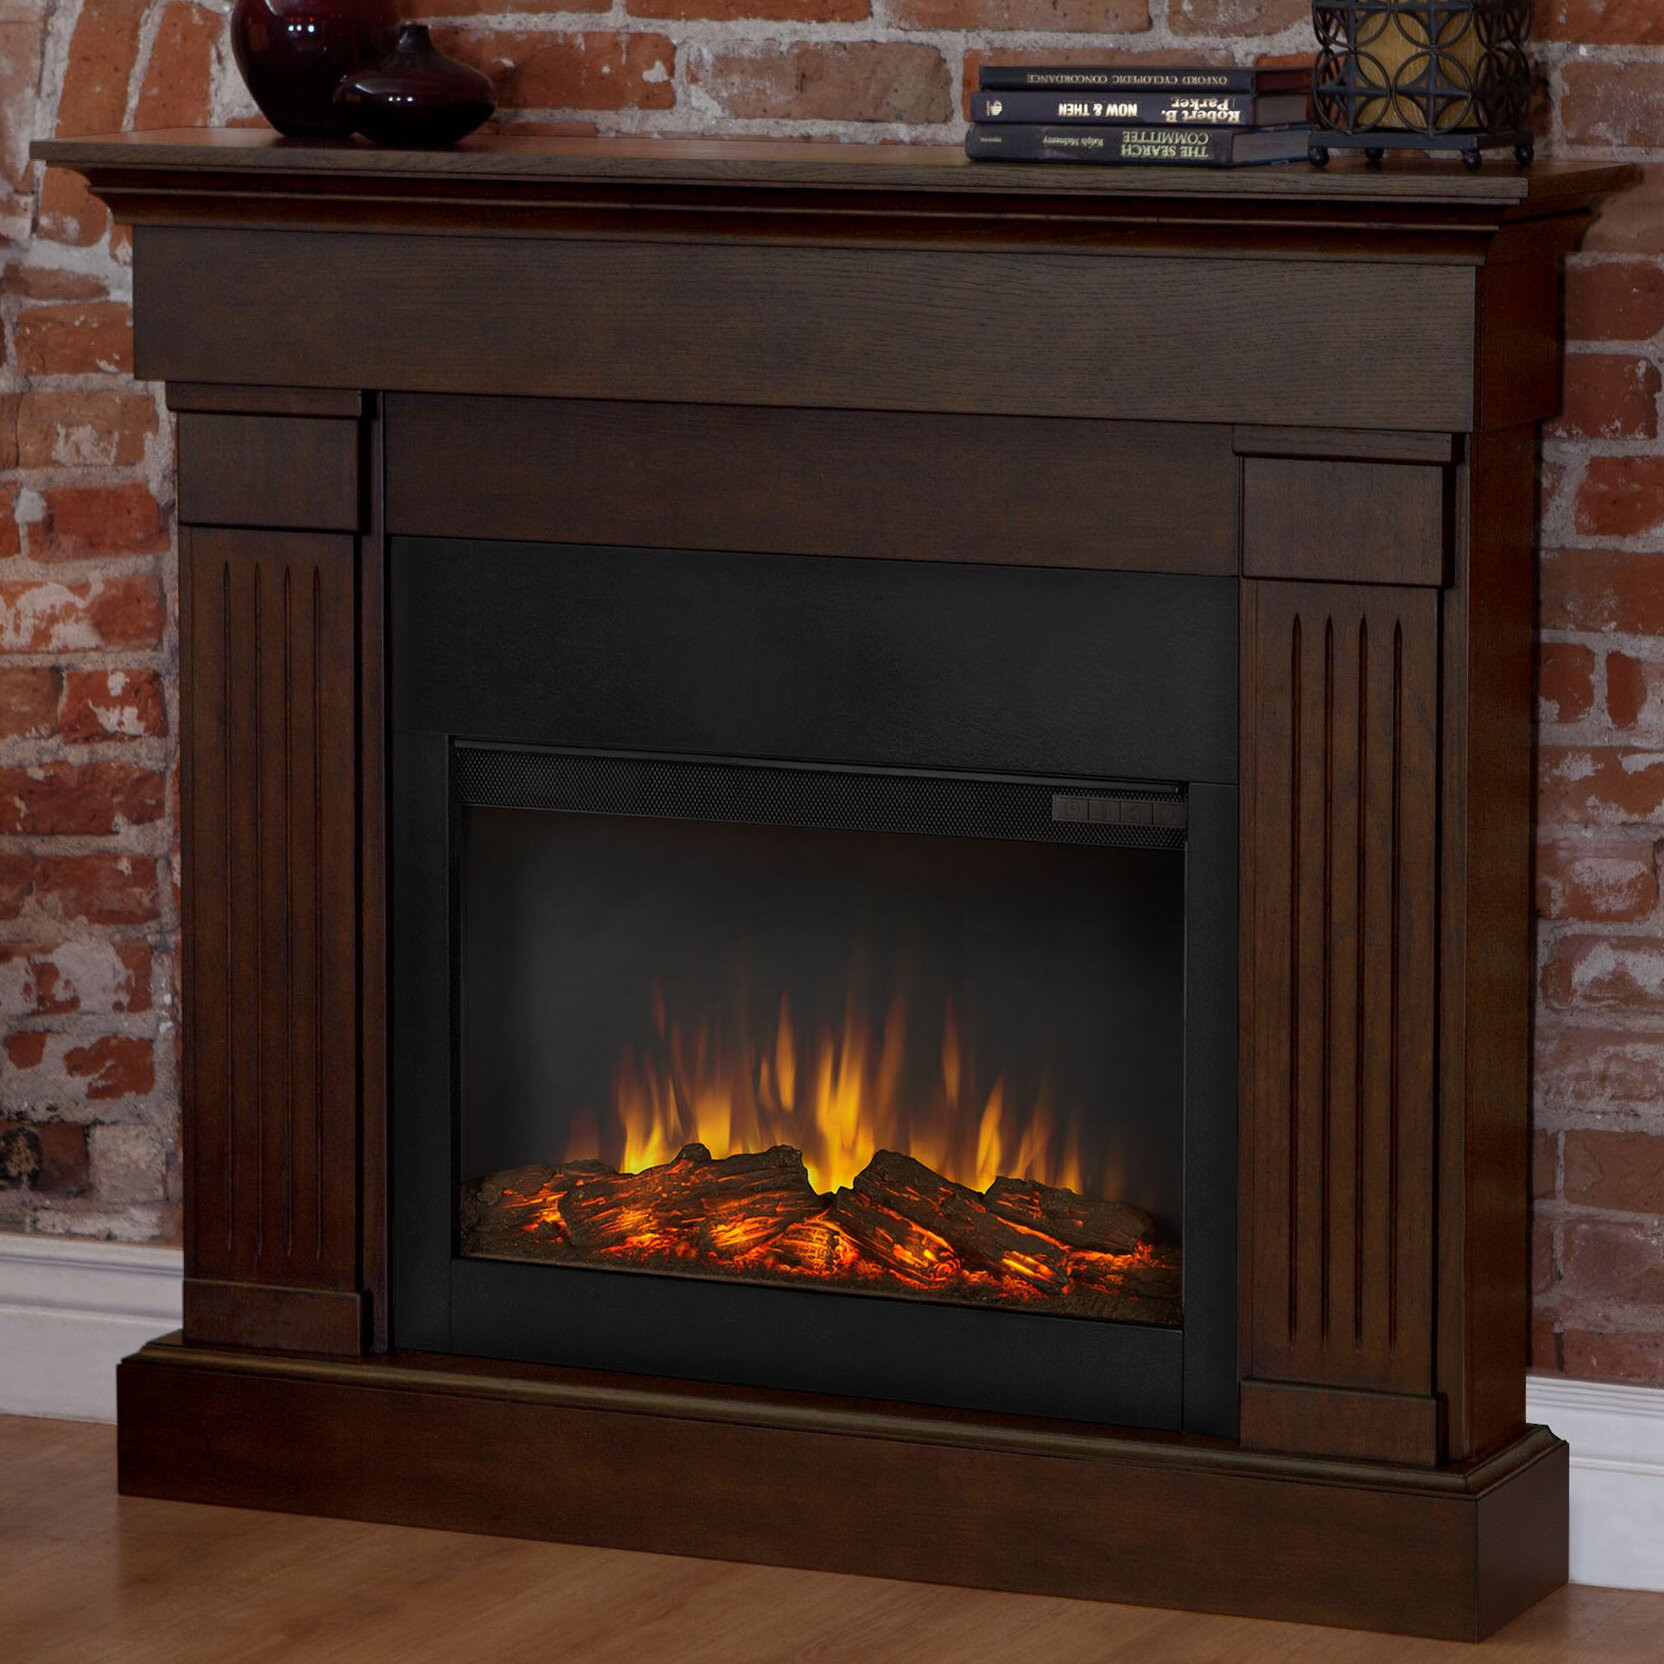 Wall Fireplace Electric
 Real Flame Slim Crawford Wall Mounted Electric Fireplace